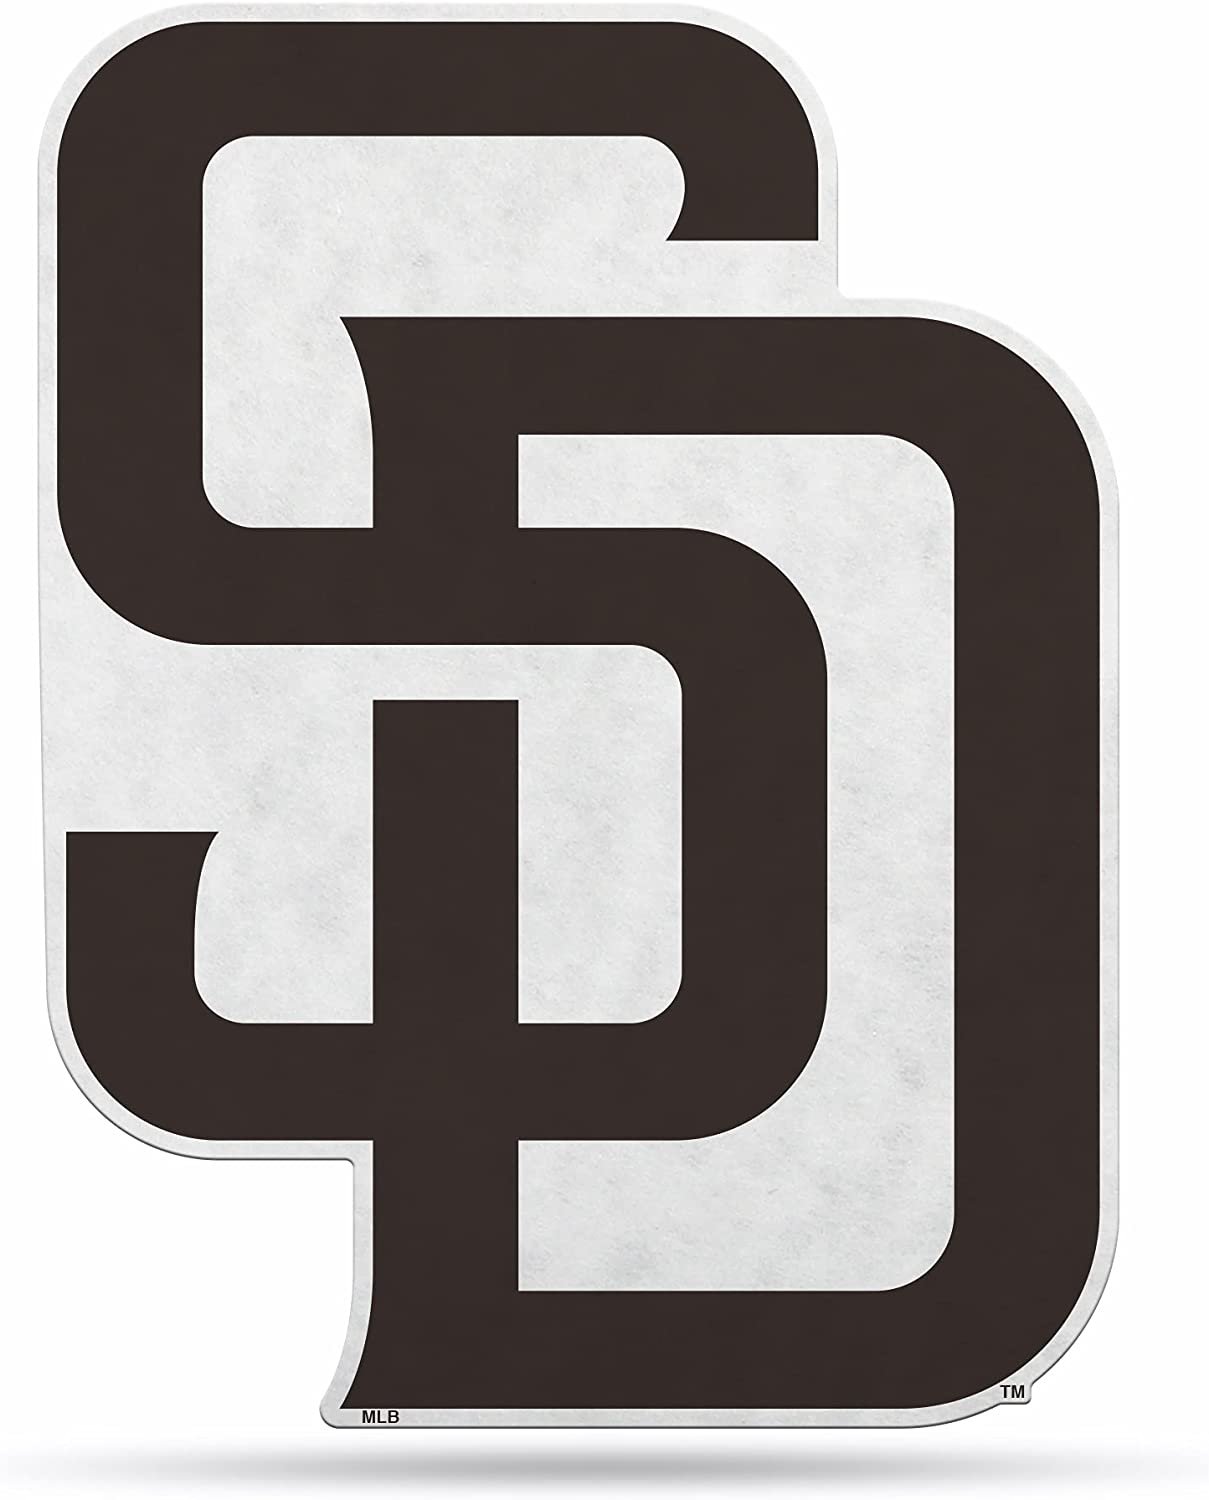 San Diego Padres Soft Felt Pennant, Primary Design, Shape Cut, 18 Inch, Easy To Hang